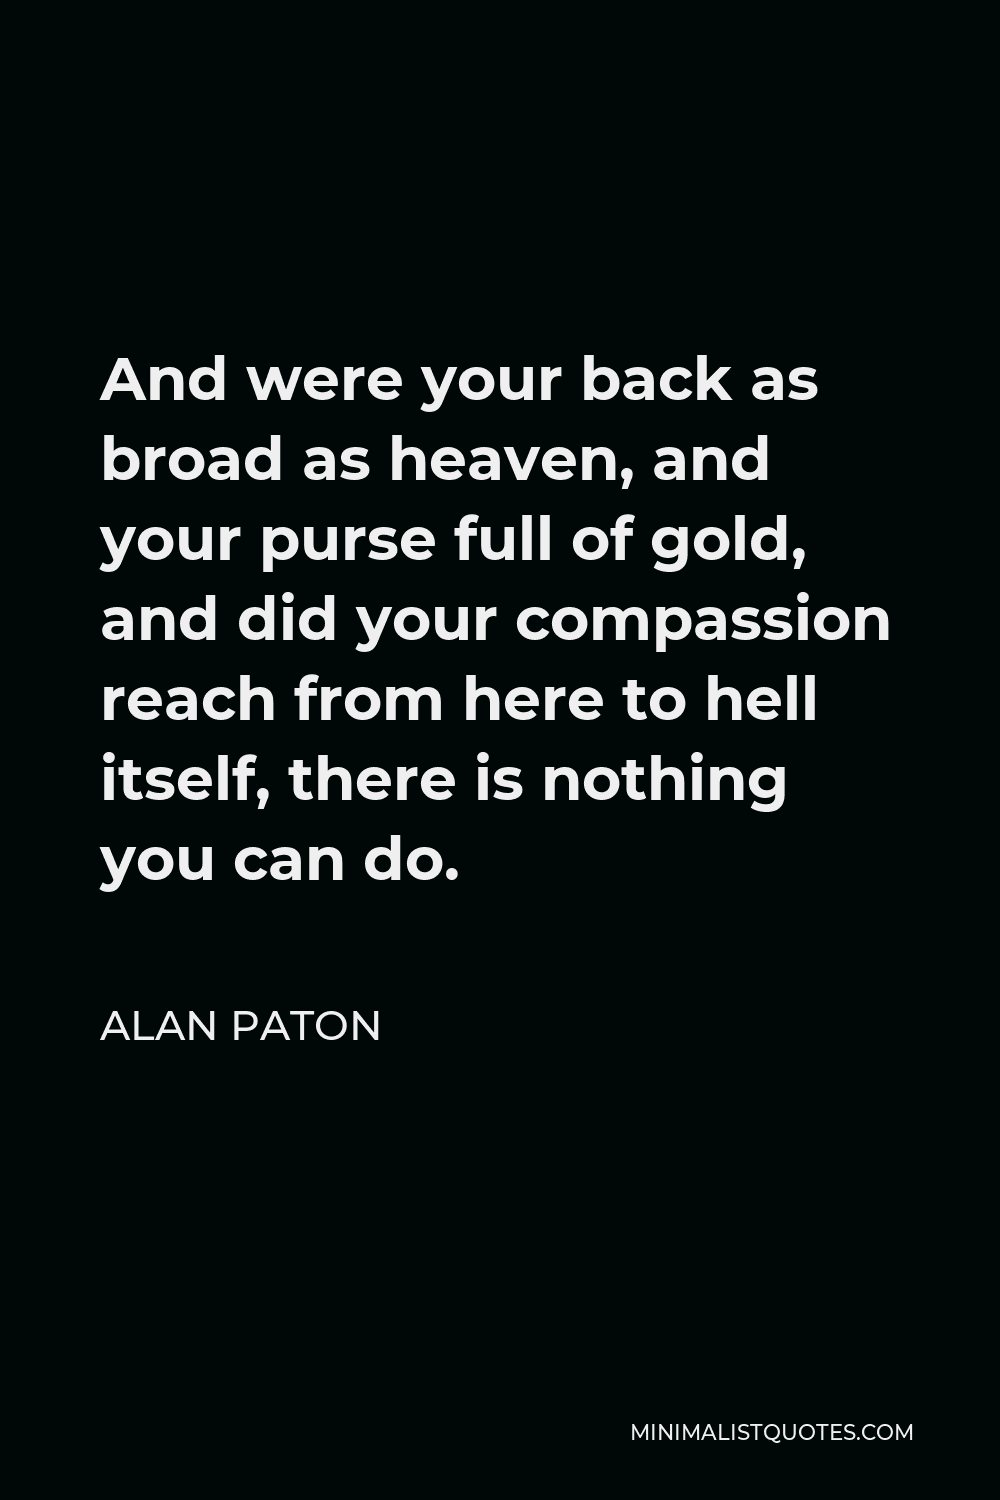 Alan Paton Quote - And were your back as broad as heaven, and your purse full of gold, and did your compassion reach from here to hell itself, there is nothing you can do.